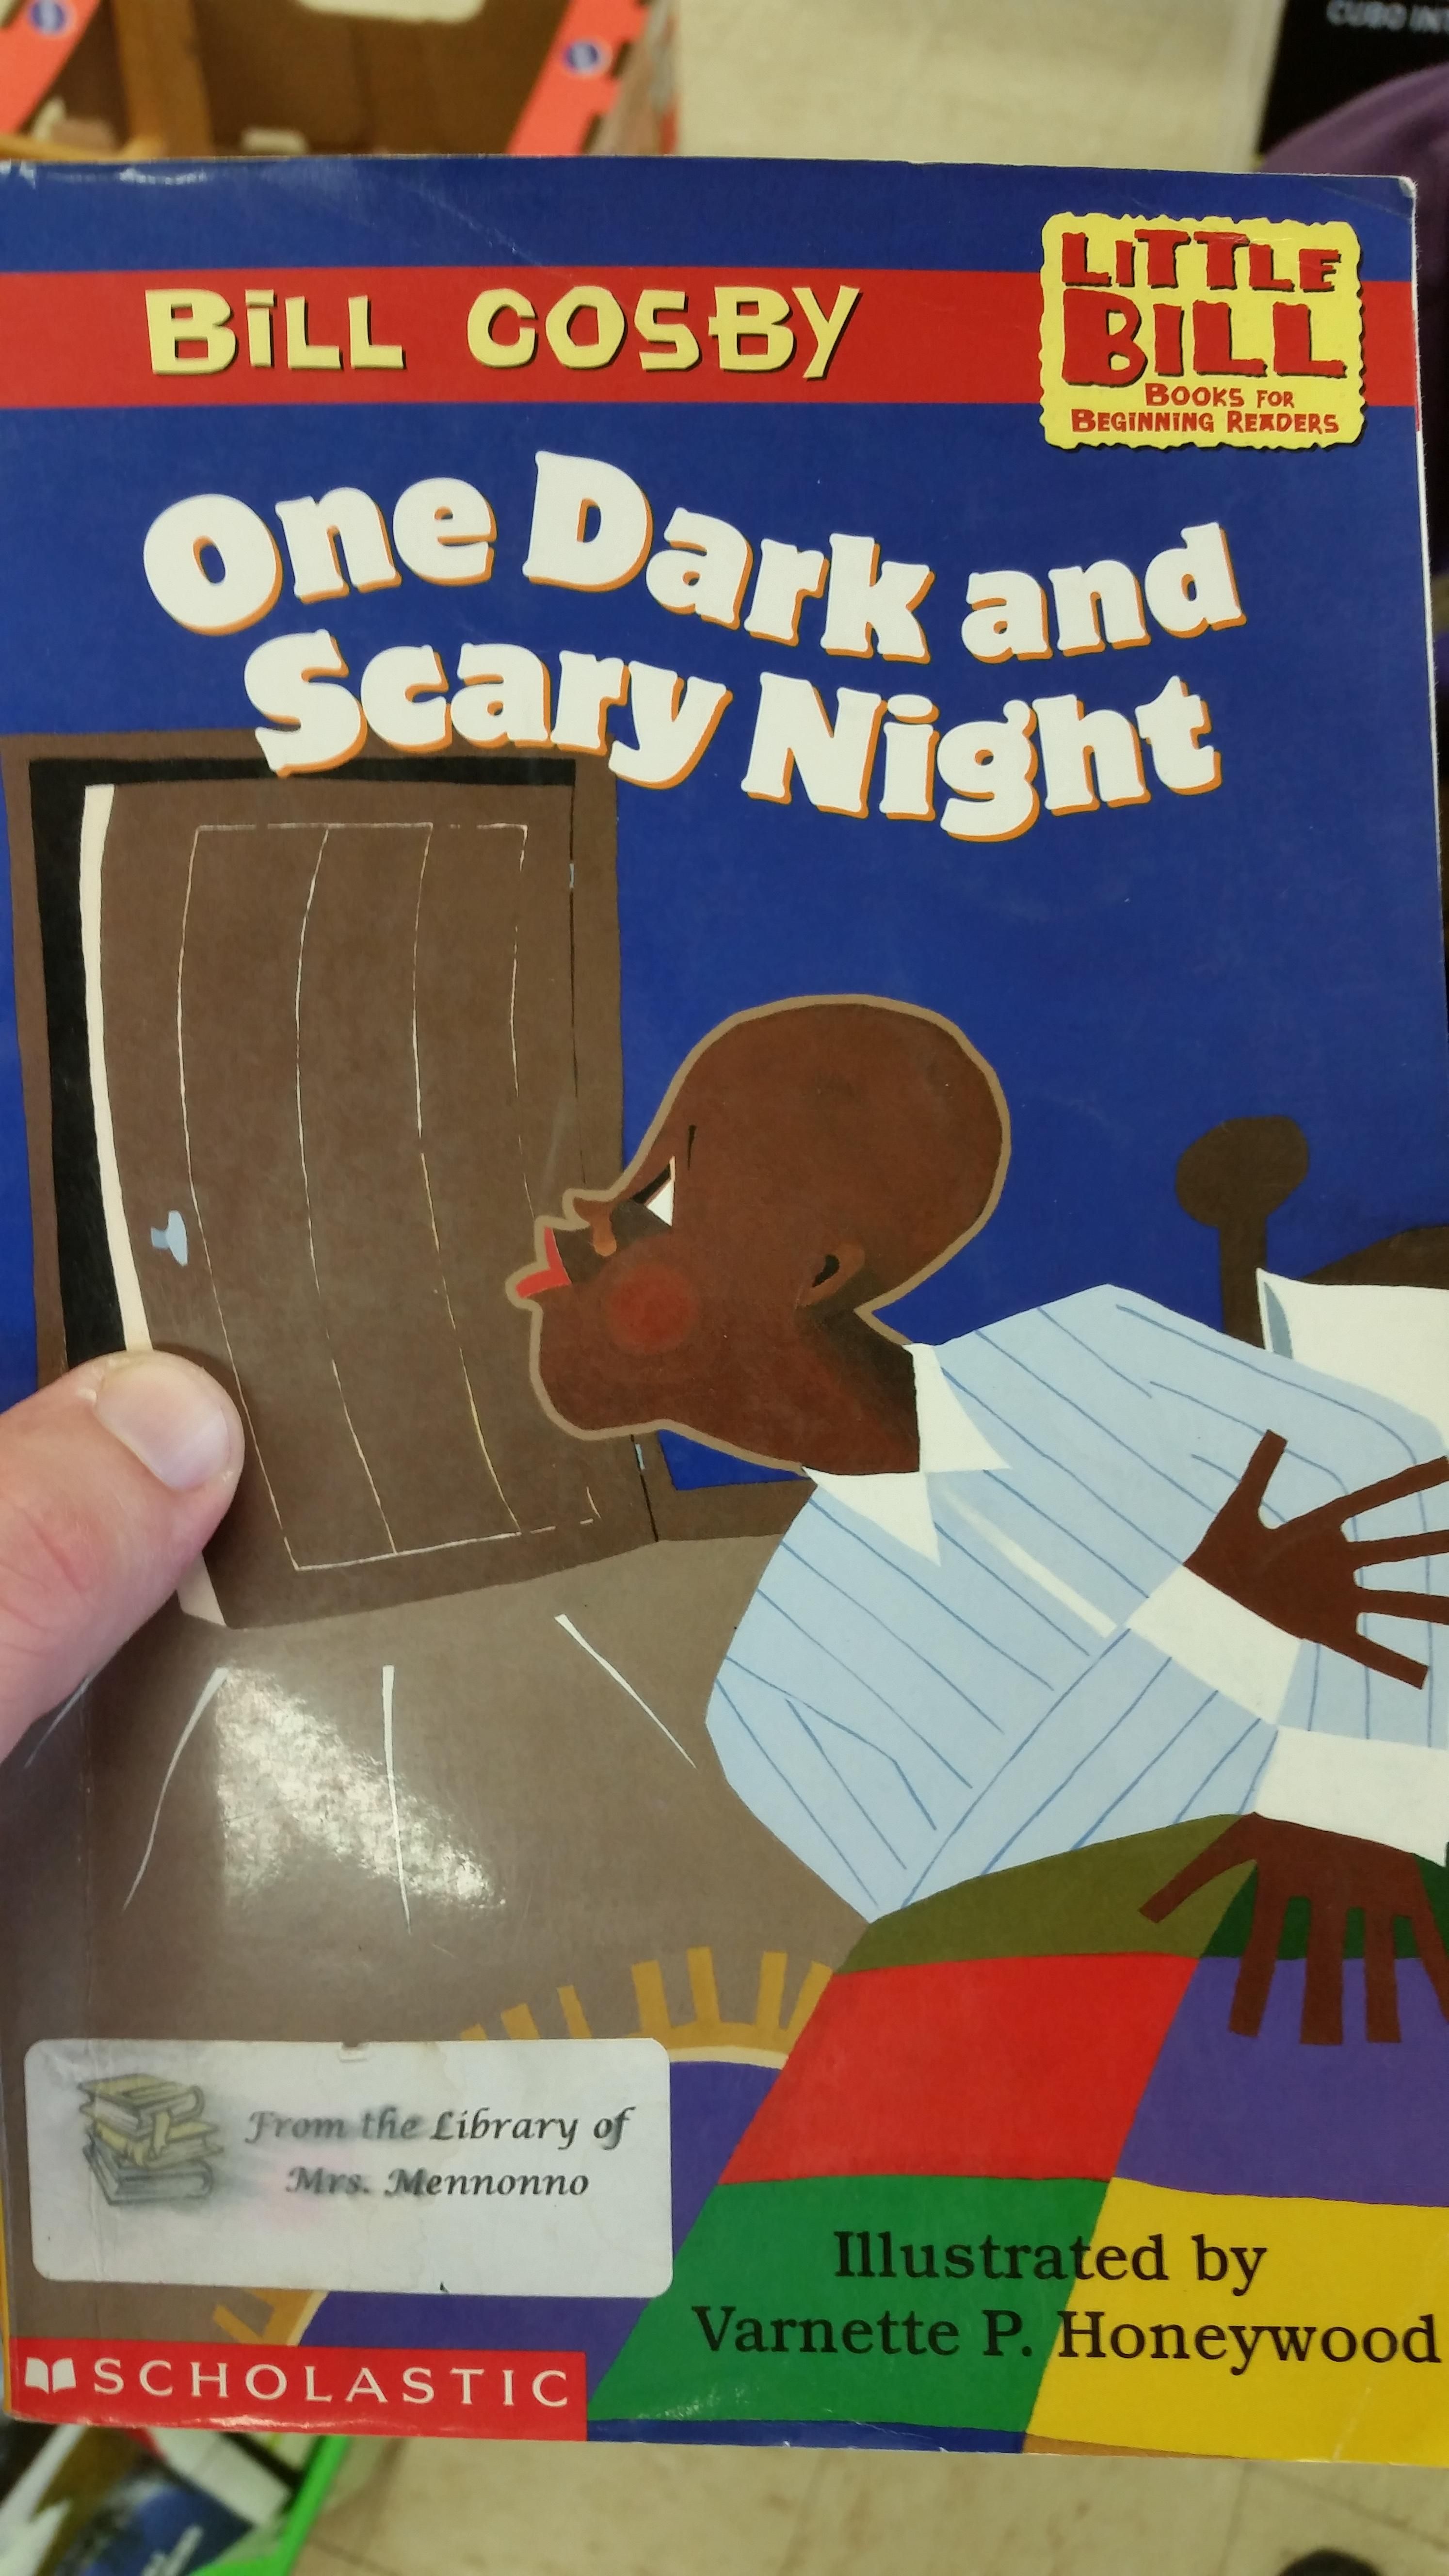 This book is much scarier now